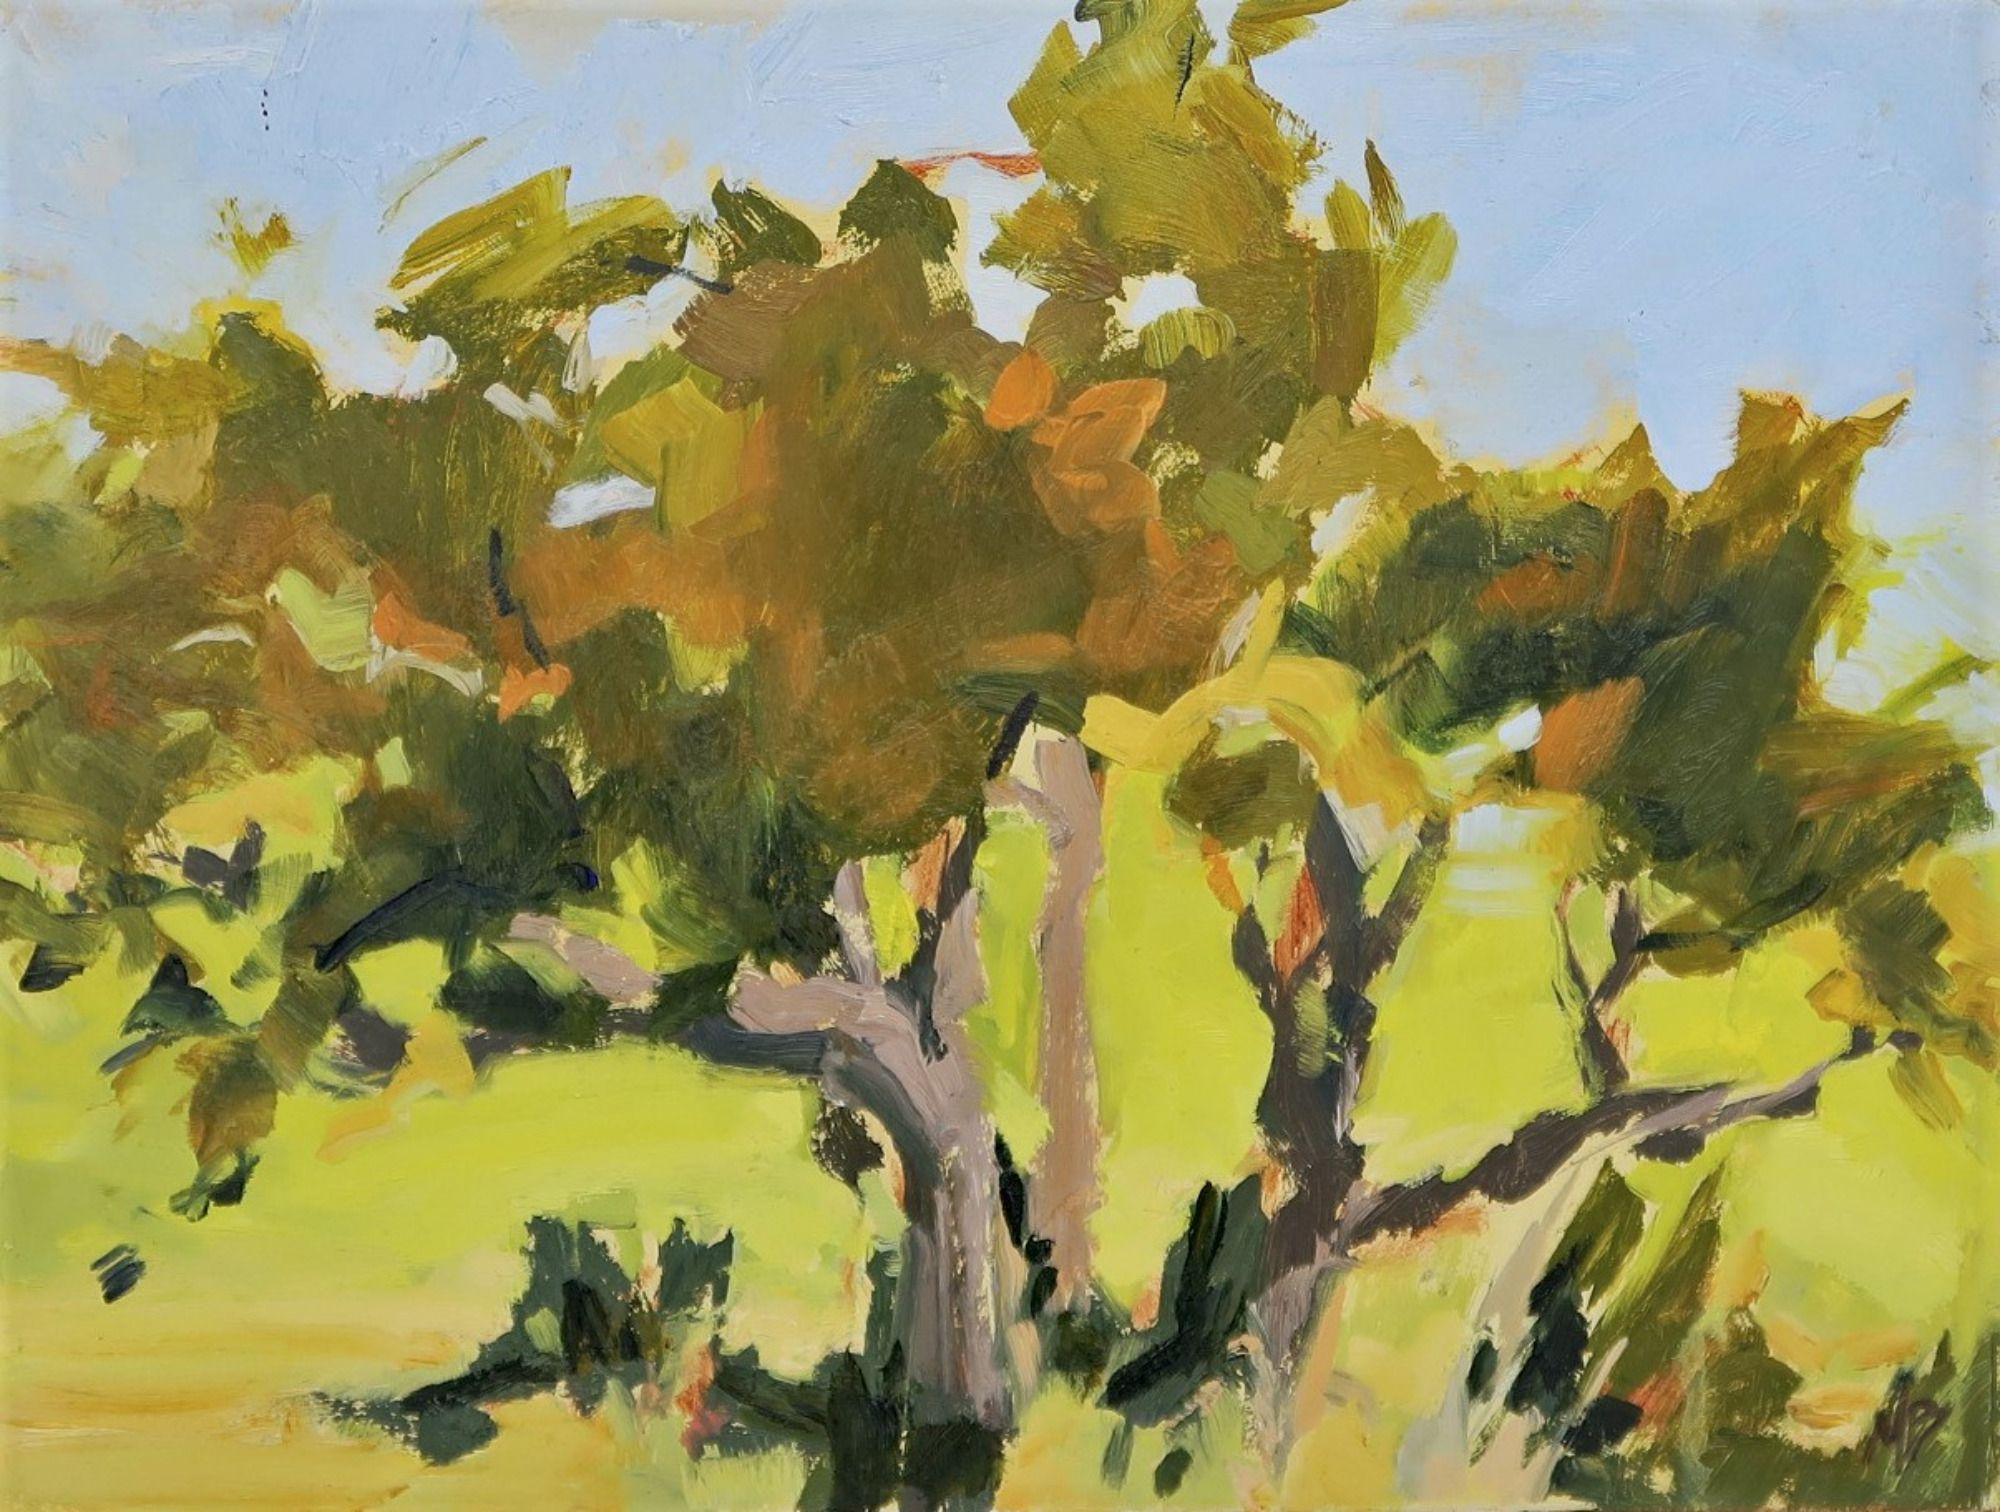 Spring energy is free and restless. Greens are vivid. This piece celebrates the energy of nature ... in trees. :: Painting :: Impressionist :: This piece comes with an official certificate of authenticity signed by the artist :: Ready to Hang: No ::